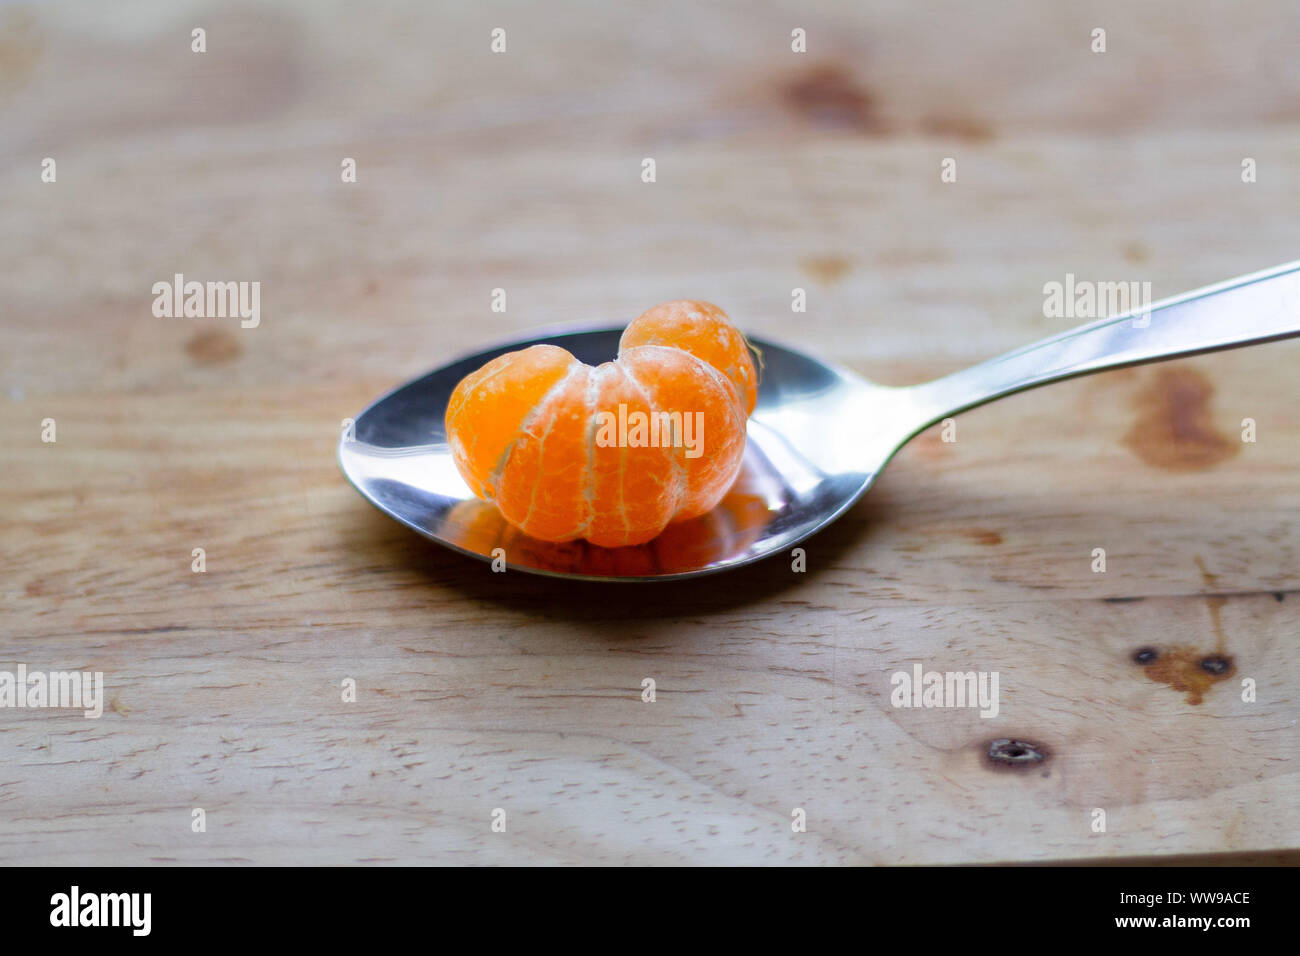 Peeled clementine orange on a spoon showing concept of summer, clean living, wellness and well-being Stock Photo